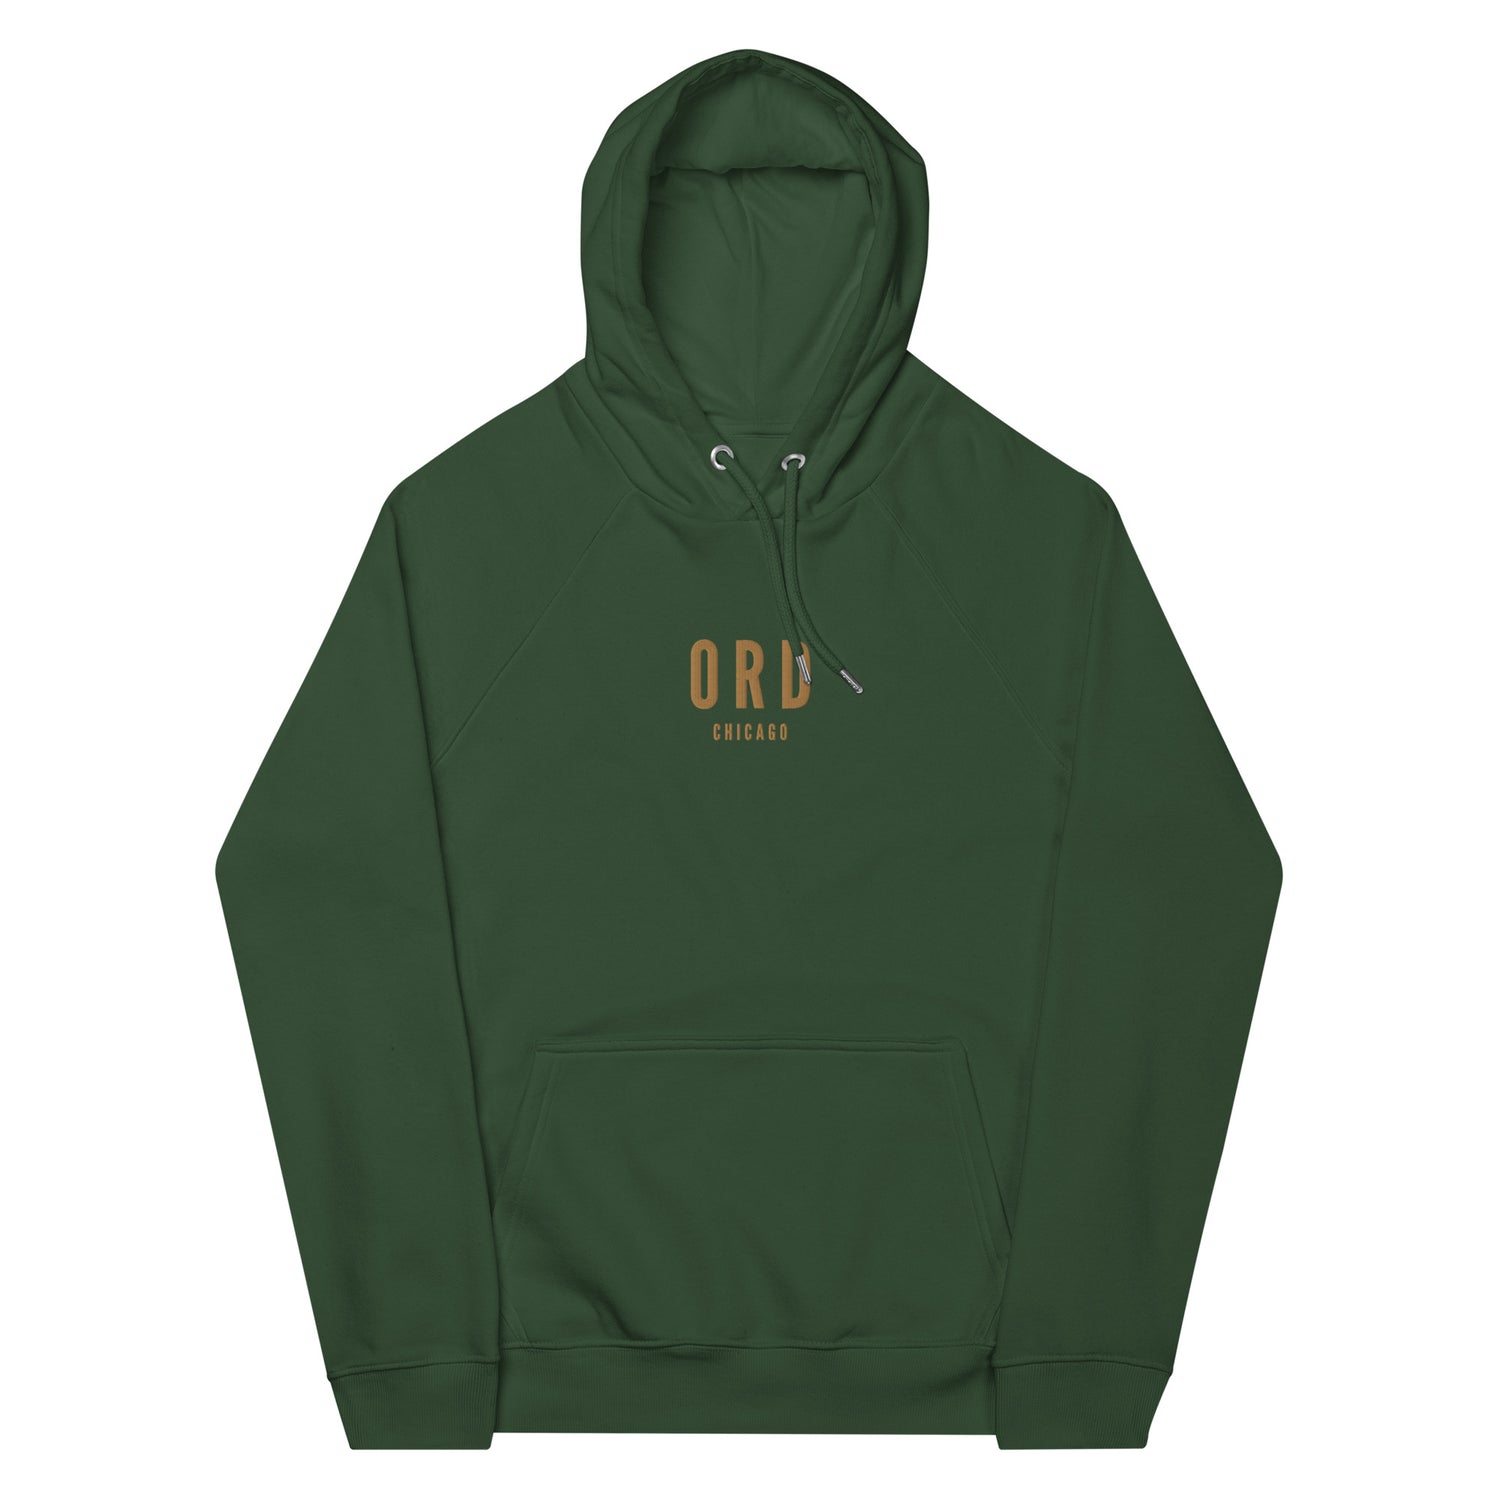 Chicago Illinois Hoodies and Sweatshirts • ORD Airport Code